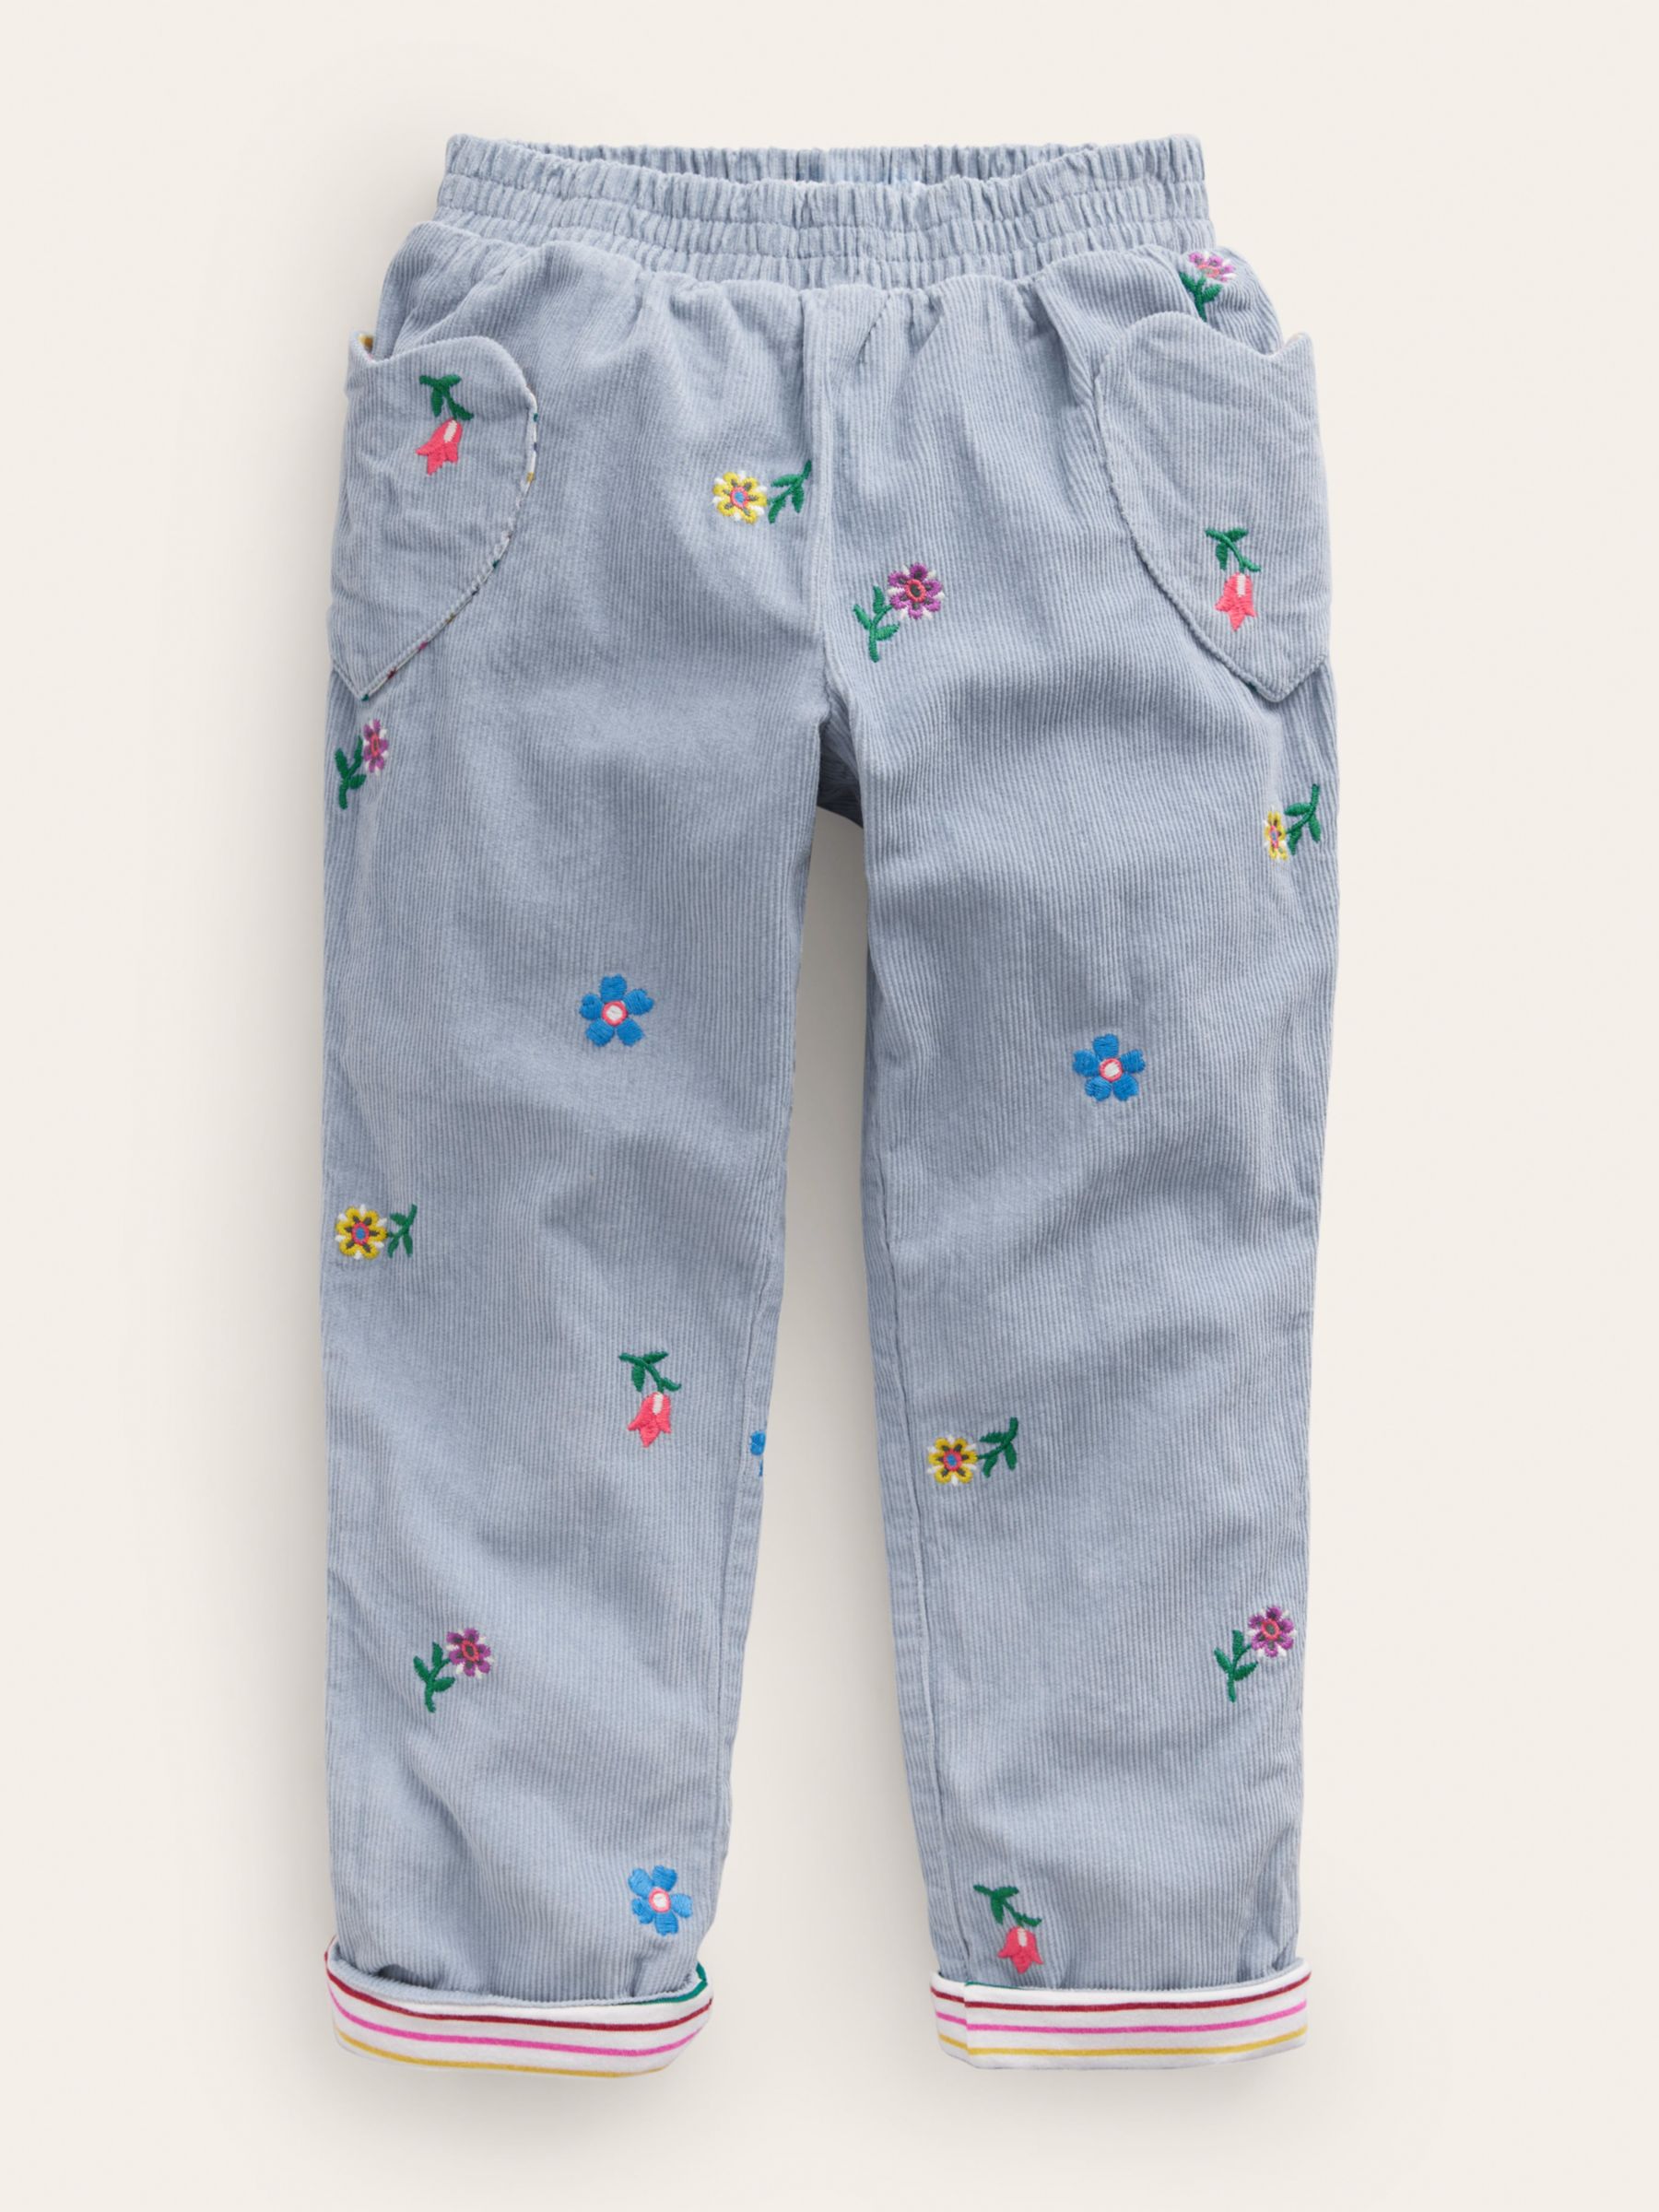 Mini Boden Kids' Lined Corduroy Floral Embroidered Pull-On Trousers, Pebble  Blue, 12-18 months